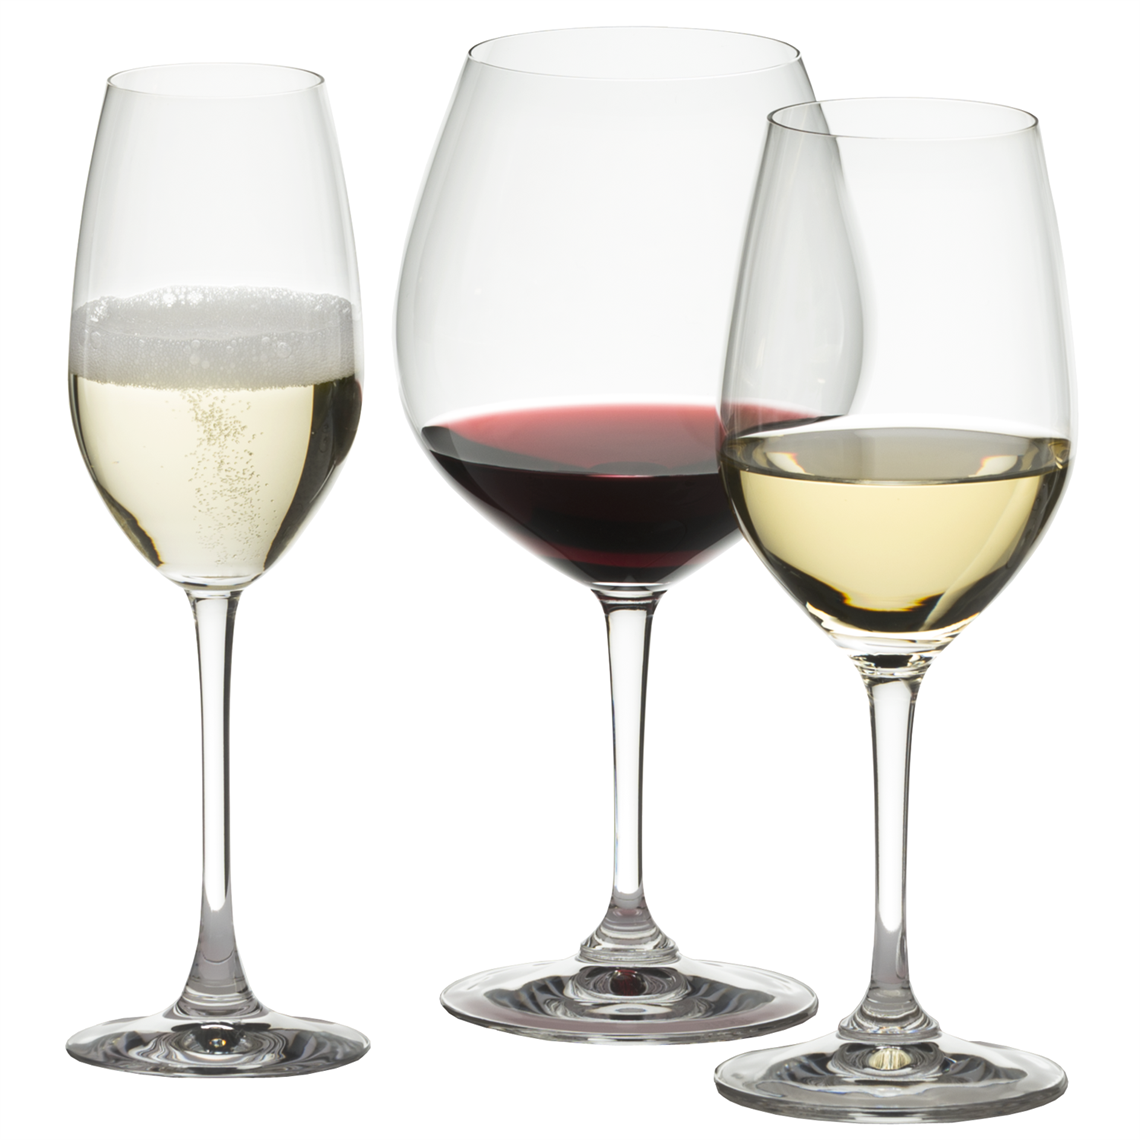 View more beginners guide to different types of wine glasses from our Restaurant & Trade Glasses range